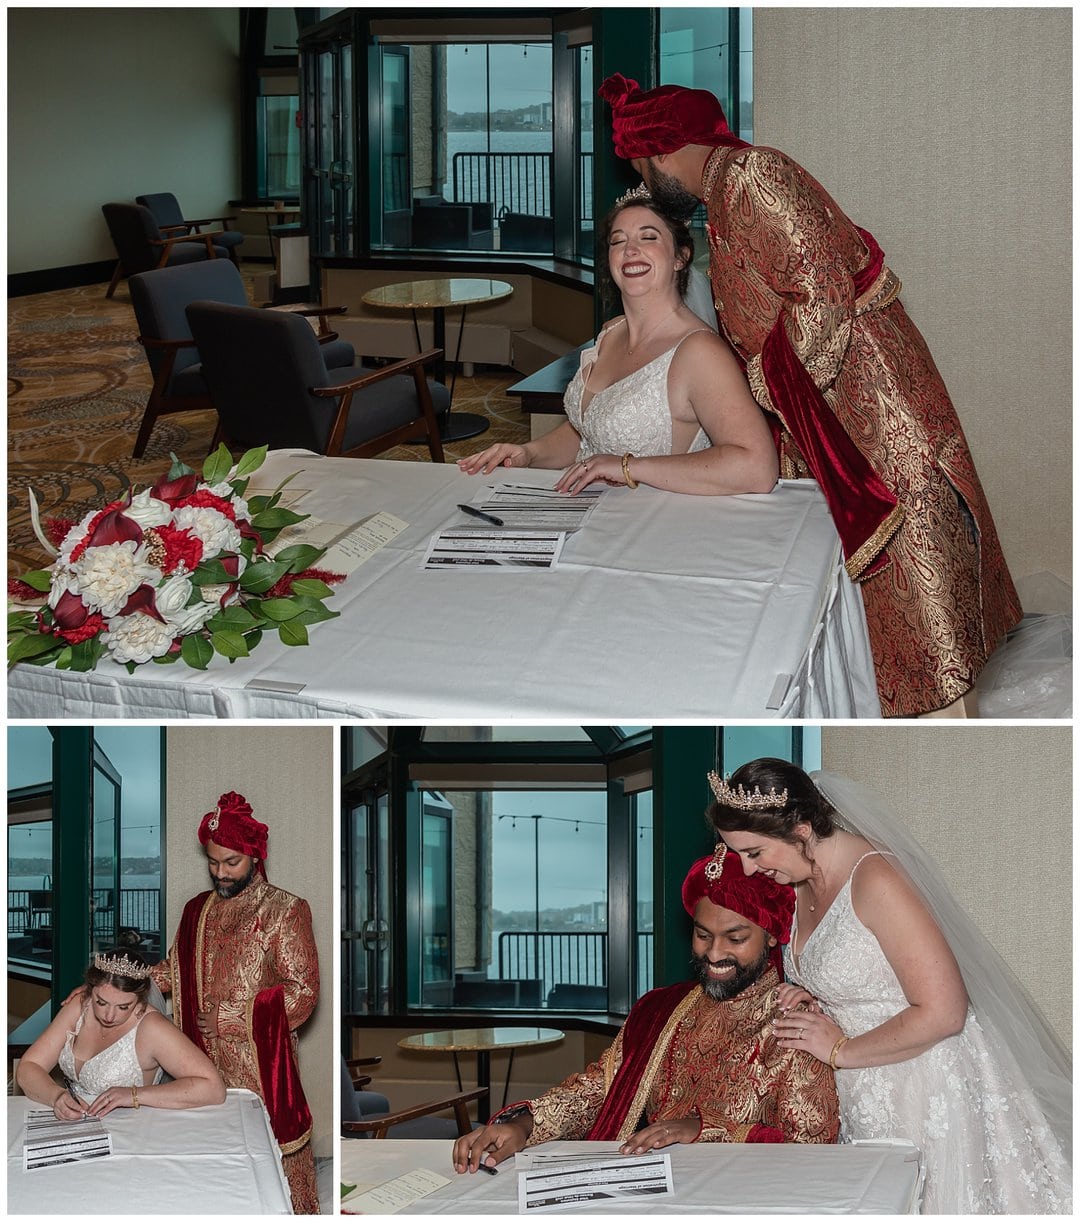 The groom and bride sign the marriage certificate during their wedding ceremony at the Halifax Marriott Harbourfront Hotel.